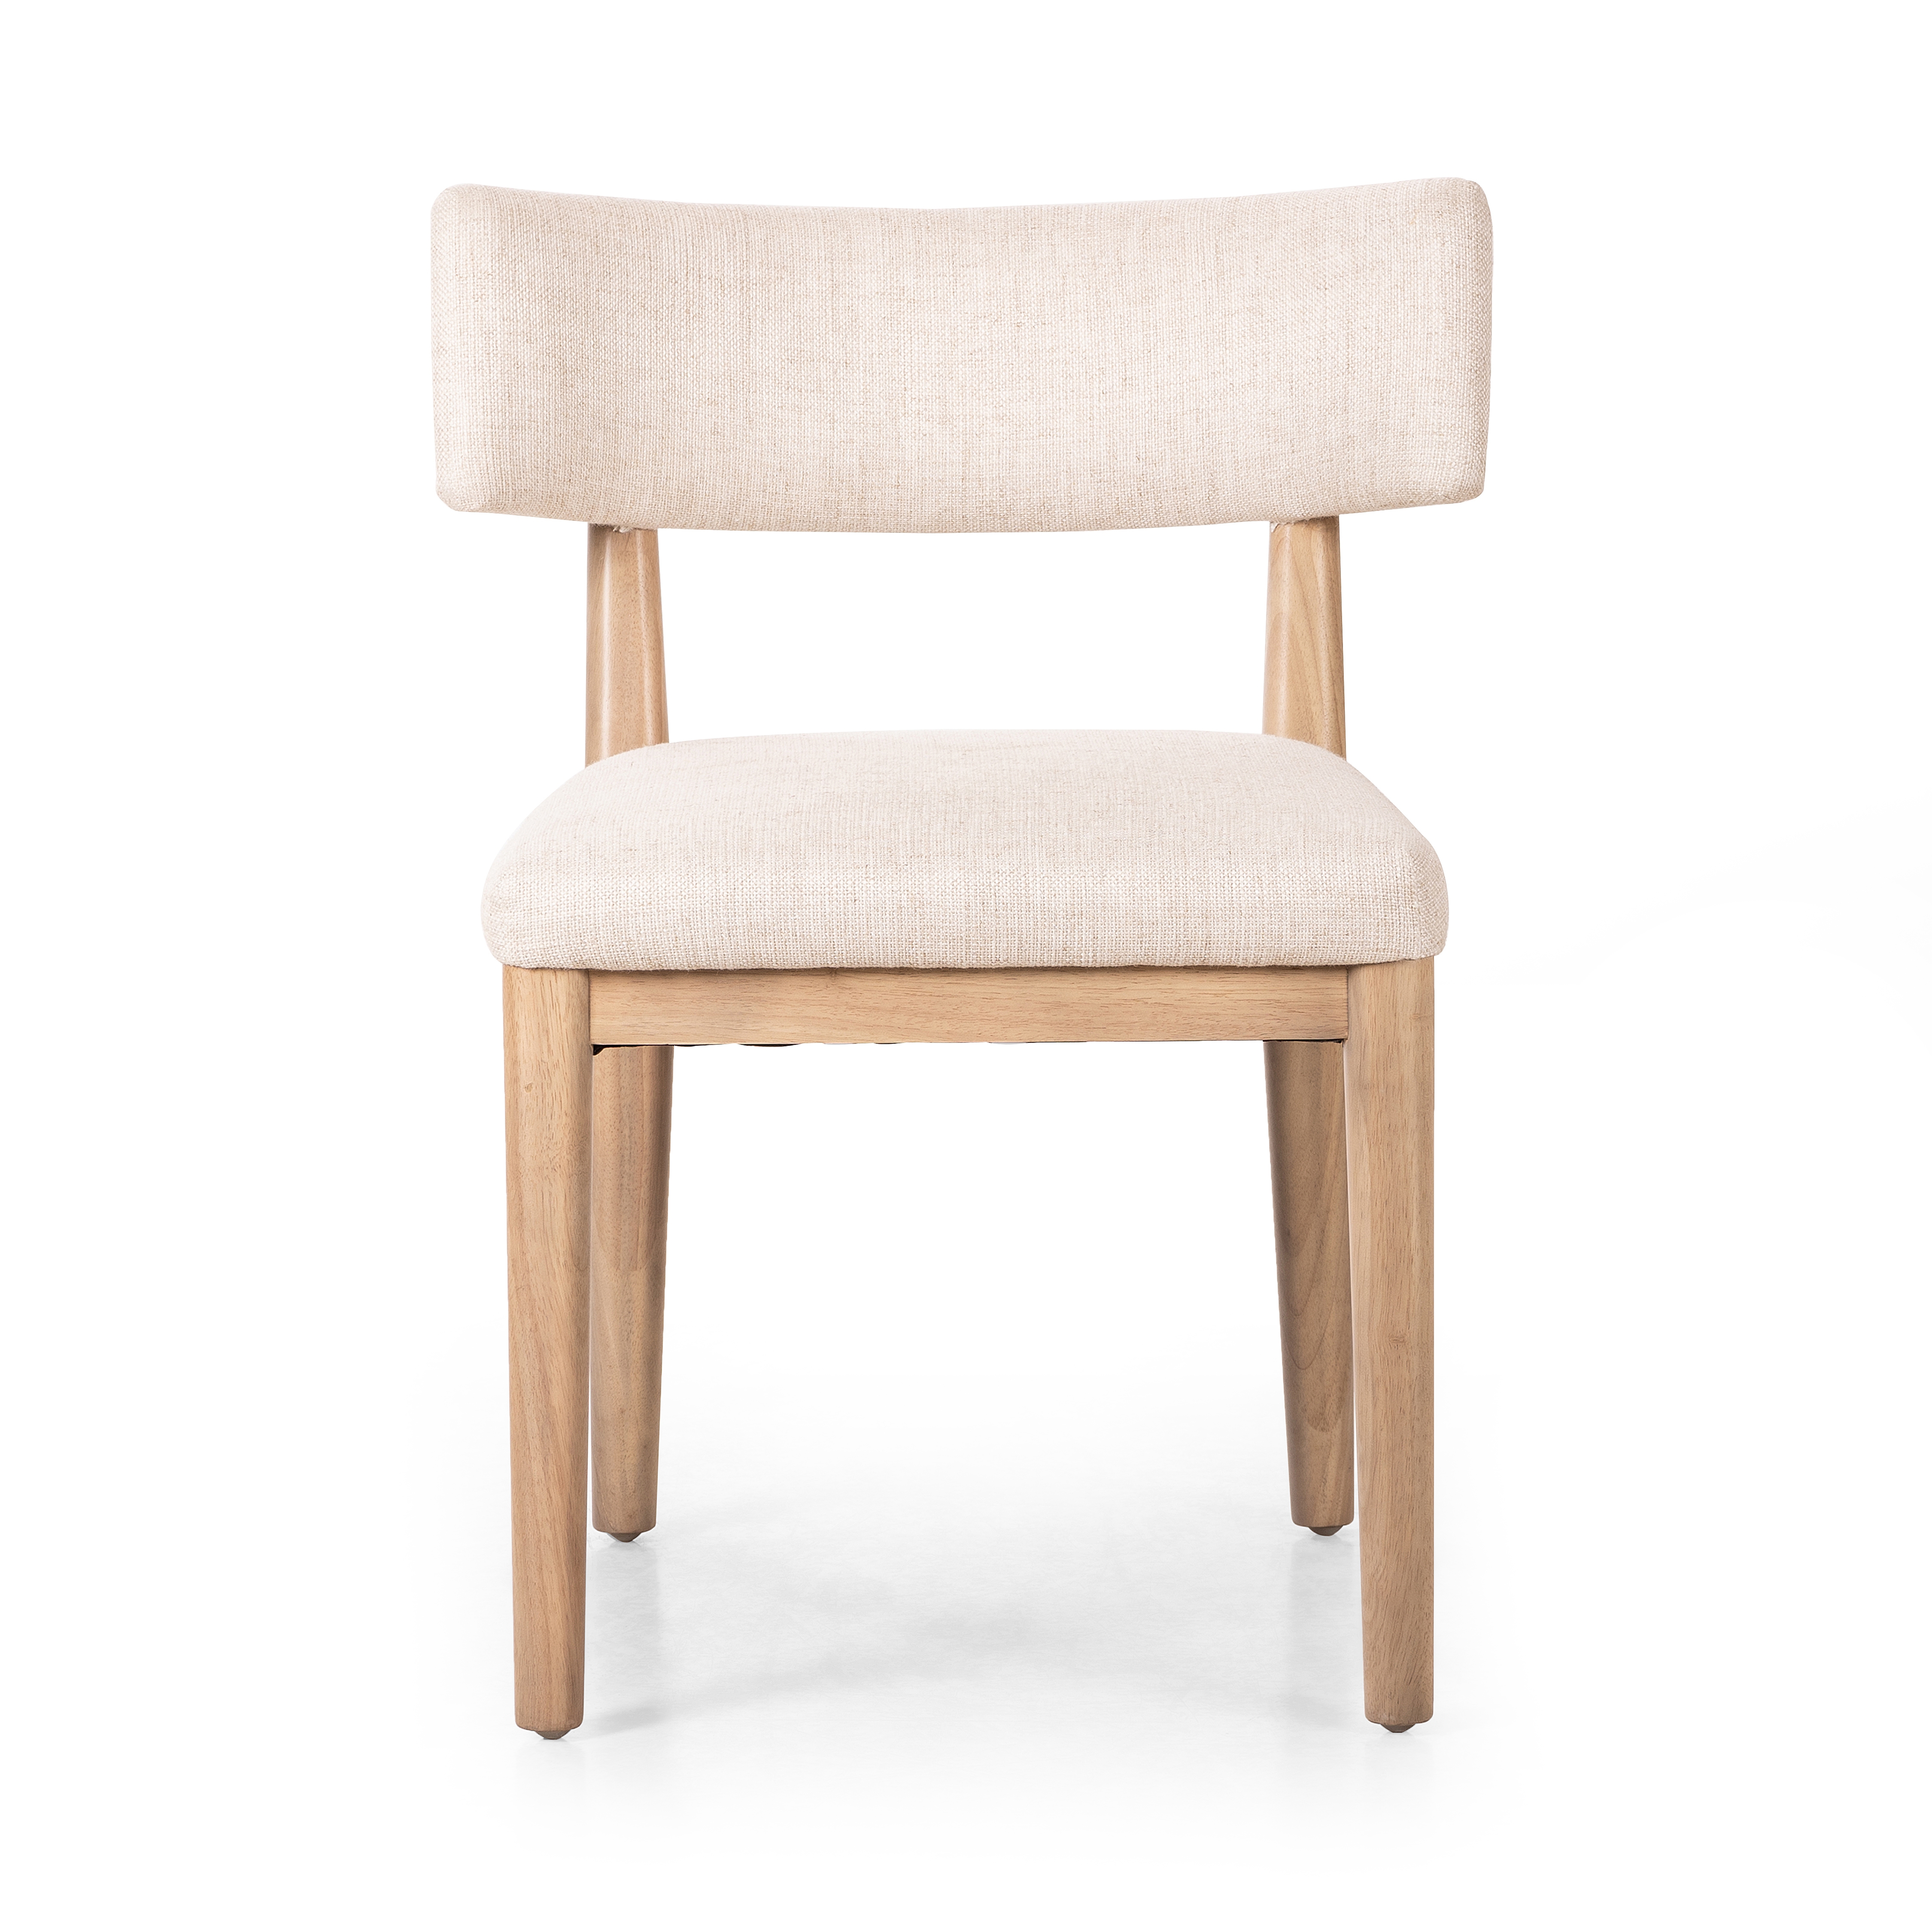 Cardell Dining Chair-Essence Natural - Image 4